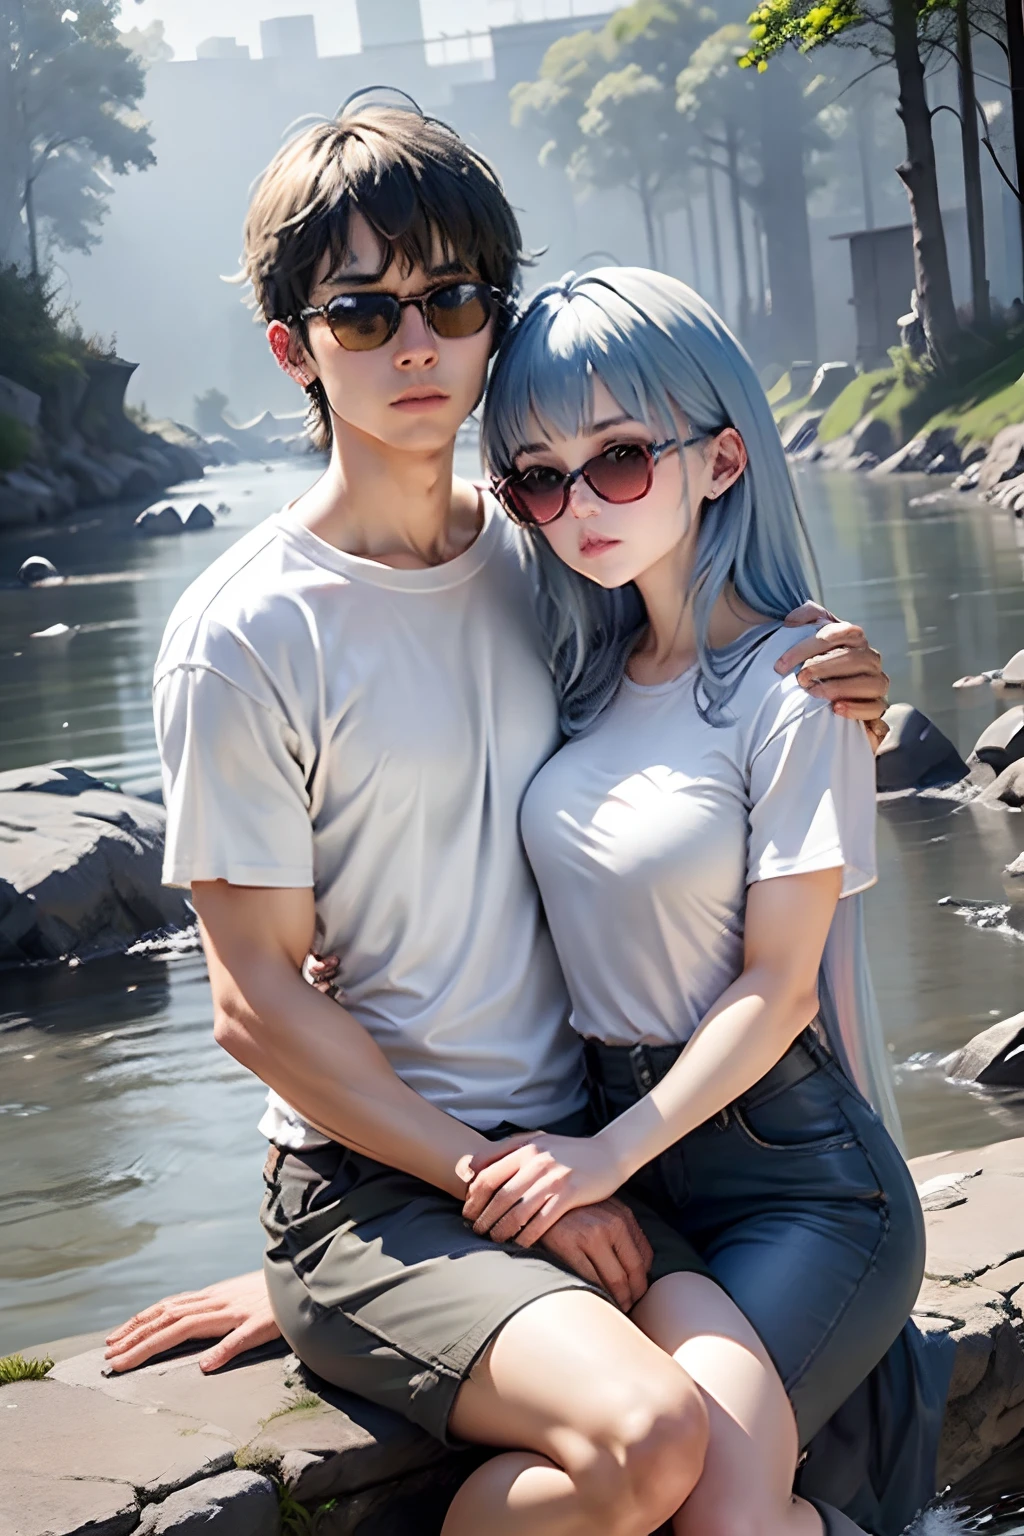 2 young people，squatted by the river，Put your hands on each other's shoulders，There is grass and stones by the river，The man on the left is wearing a white shirt，Wearing sunglasses，The man on the right wears a gray and yellow horizontal striped T-shirt，wears glasses